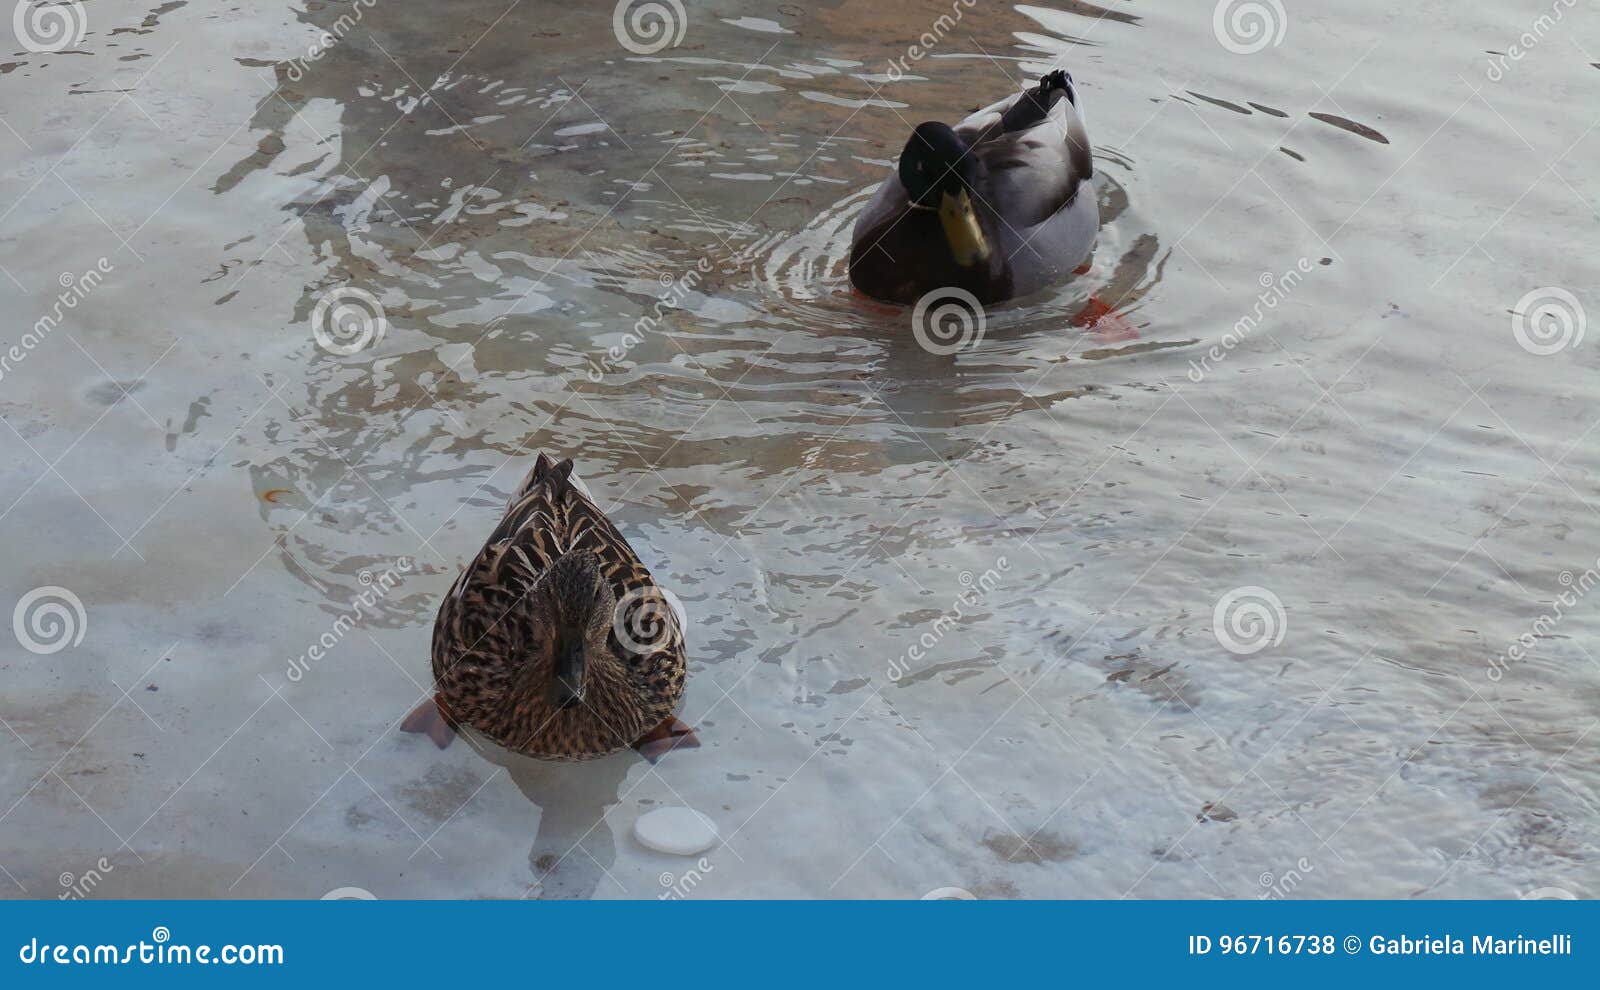 couple of ducks swimming in the water